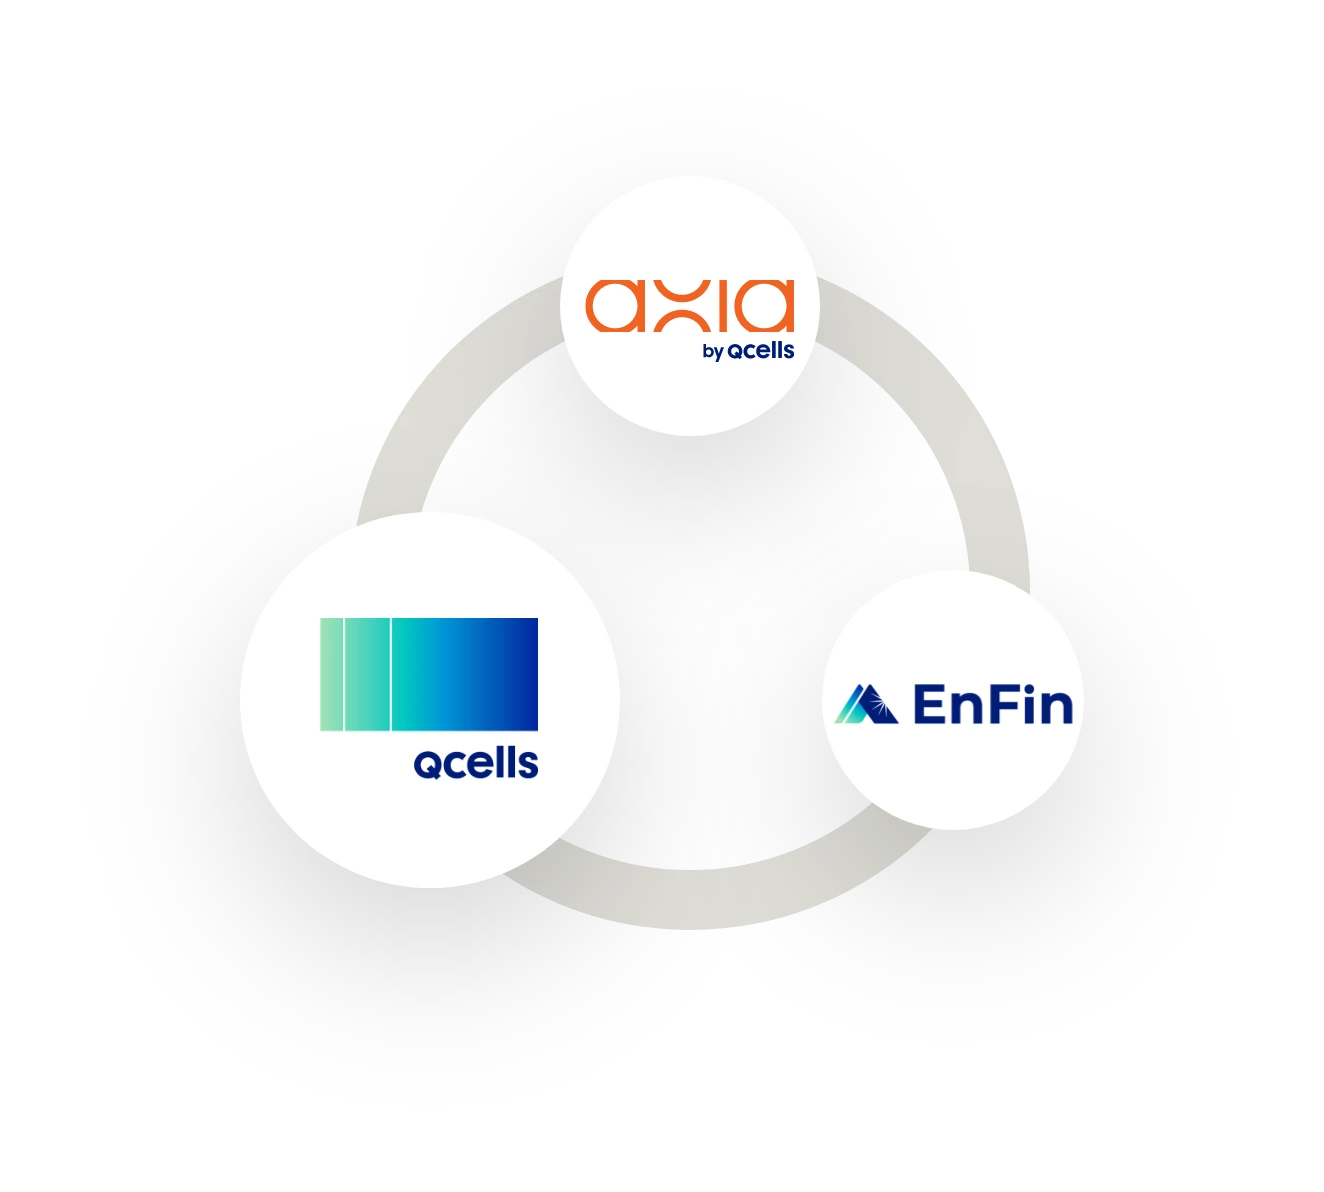 One company Qcells highlighted